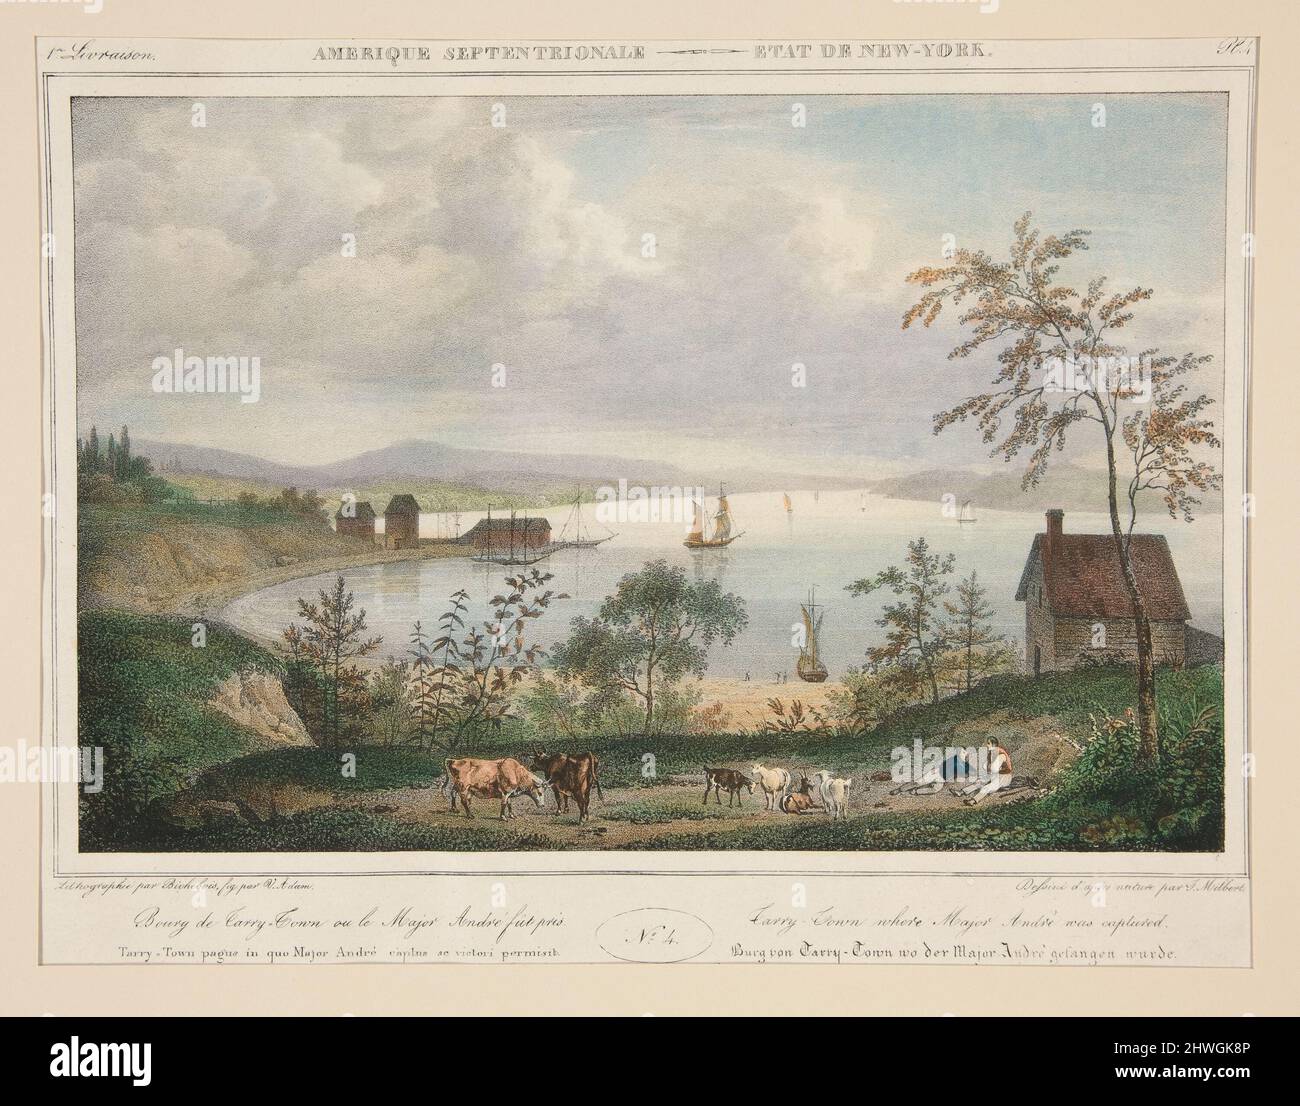 Amerique Septentrionale - Etat de New-York. N. 4, pl. 4….Tarry-Town where Major André was captured.. Lithographer: Louis-Pierre-Alphonse Bichebois, French, 1801–1850Lithographer: Victor Adam, French, 1801–1866After: Jacques Gerard Milbert, French, 1766–1840 Stock Photo